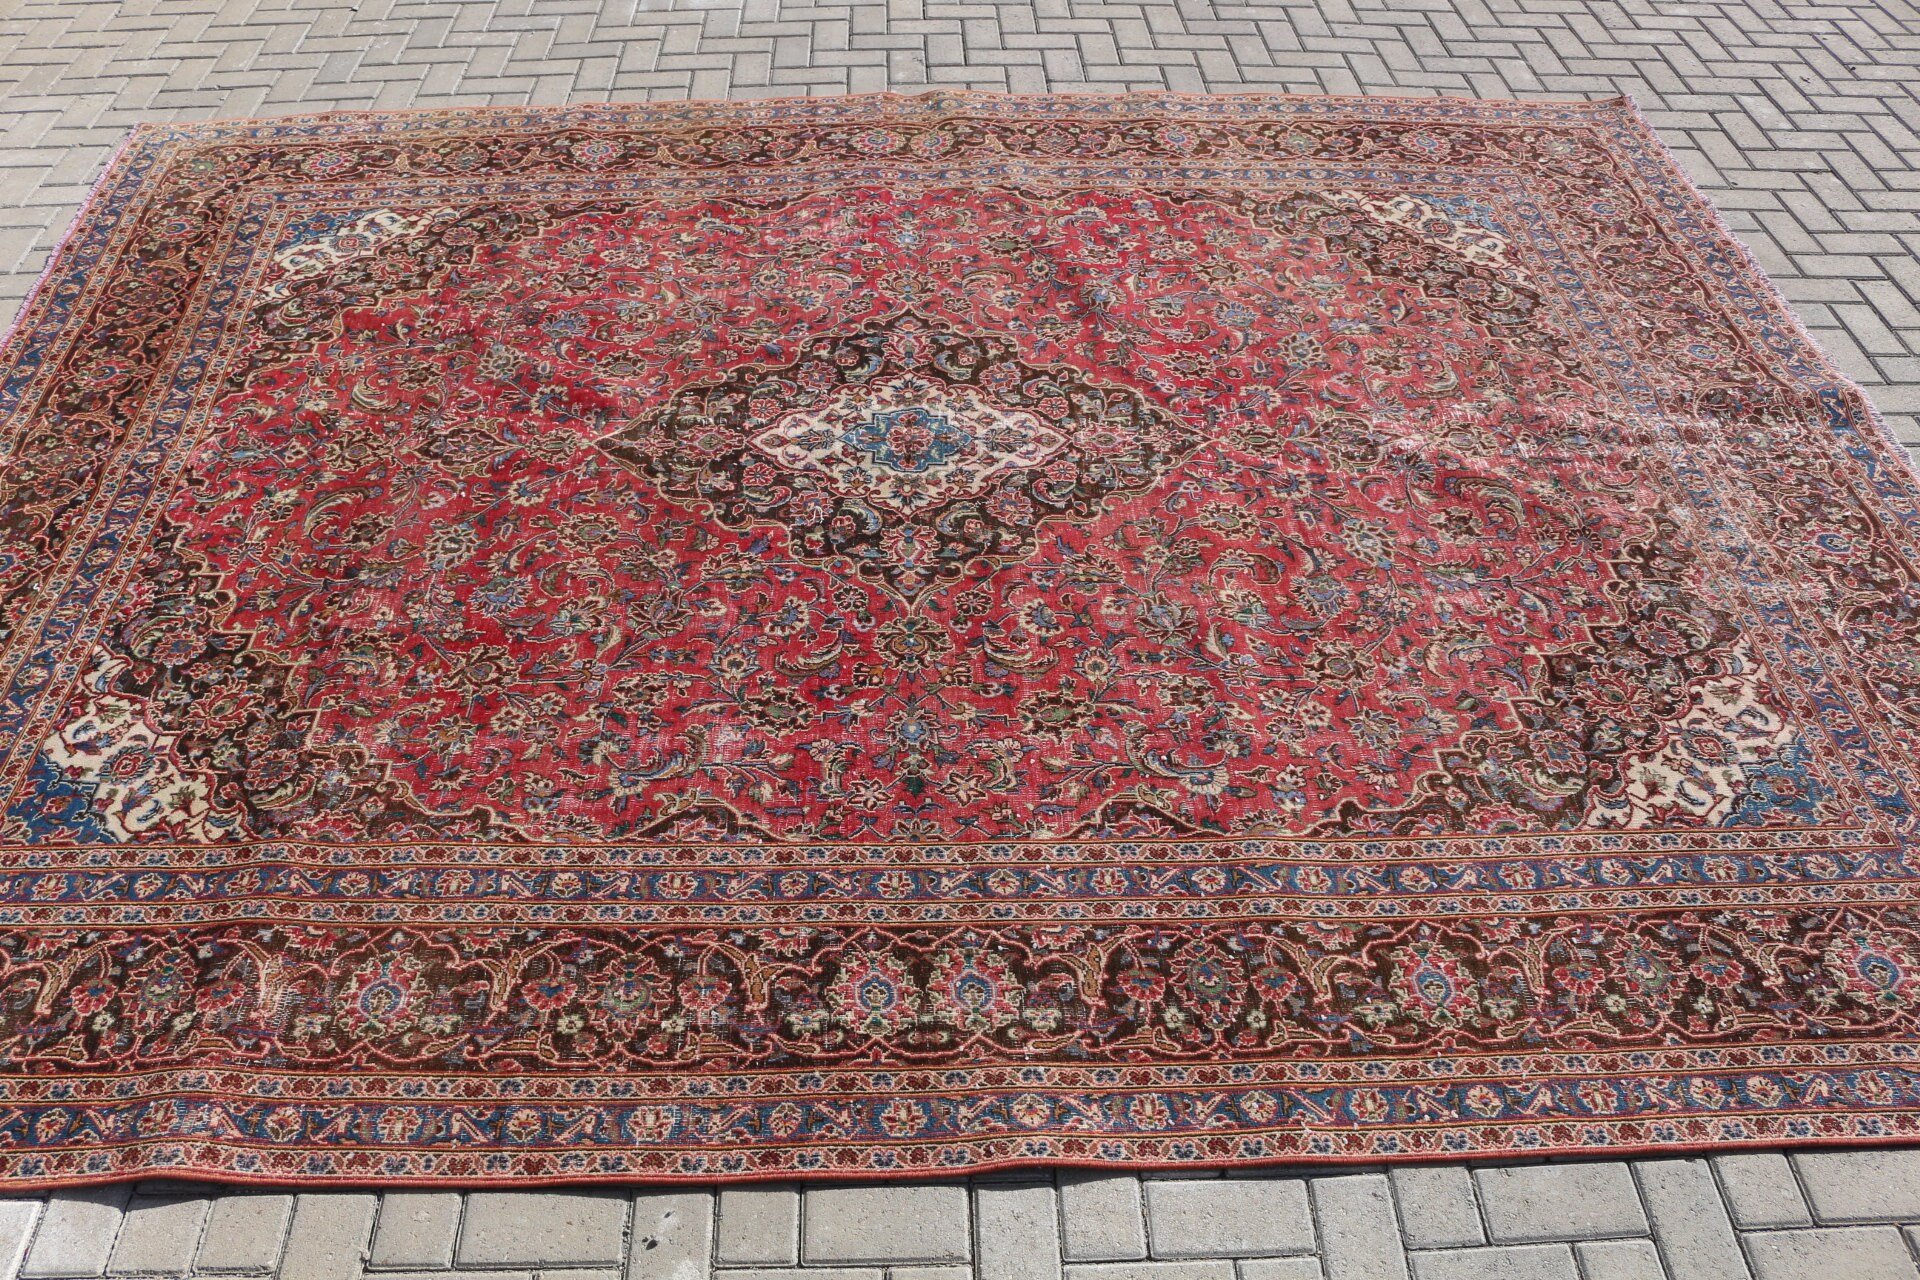 Turkish Rugs, Saloon Rugs, Vintage Rugs, Anatolian Rug, Bright Rug, Living Room Rugs, Cool Rugs, Red Moroccan Rug, 9.4x12.4 ft Oversize Rug